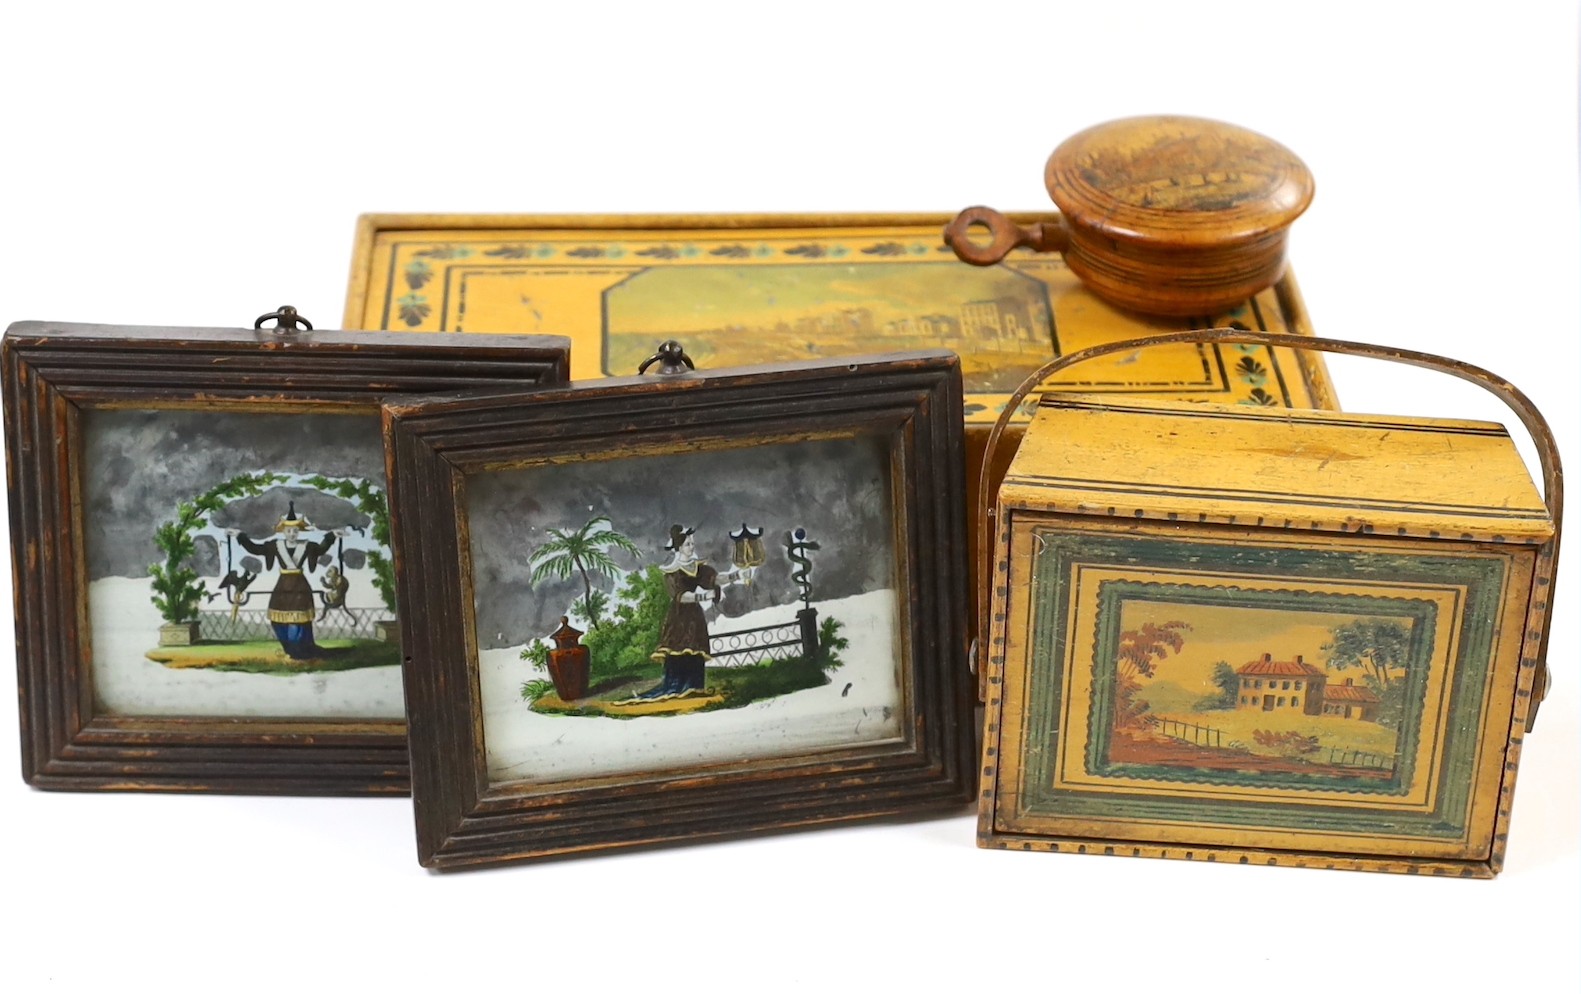 Two early 19th century boxes, a circular Brighton nutmeg grater and a pair of framed early 19th century reverse prints, chinoiserie subjects